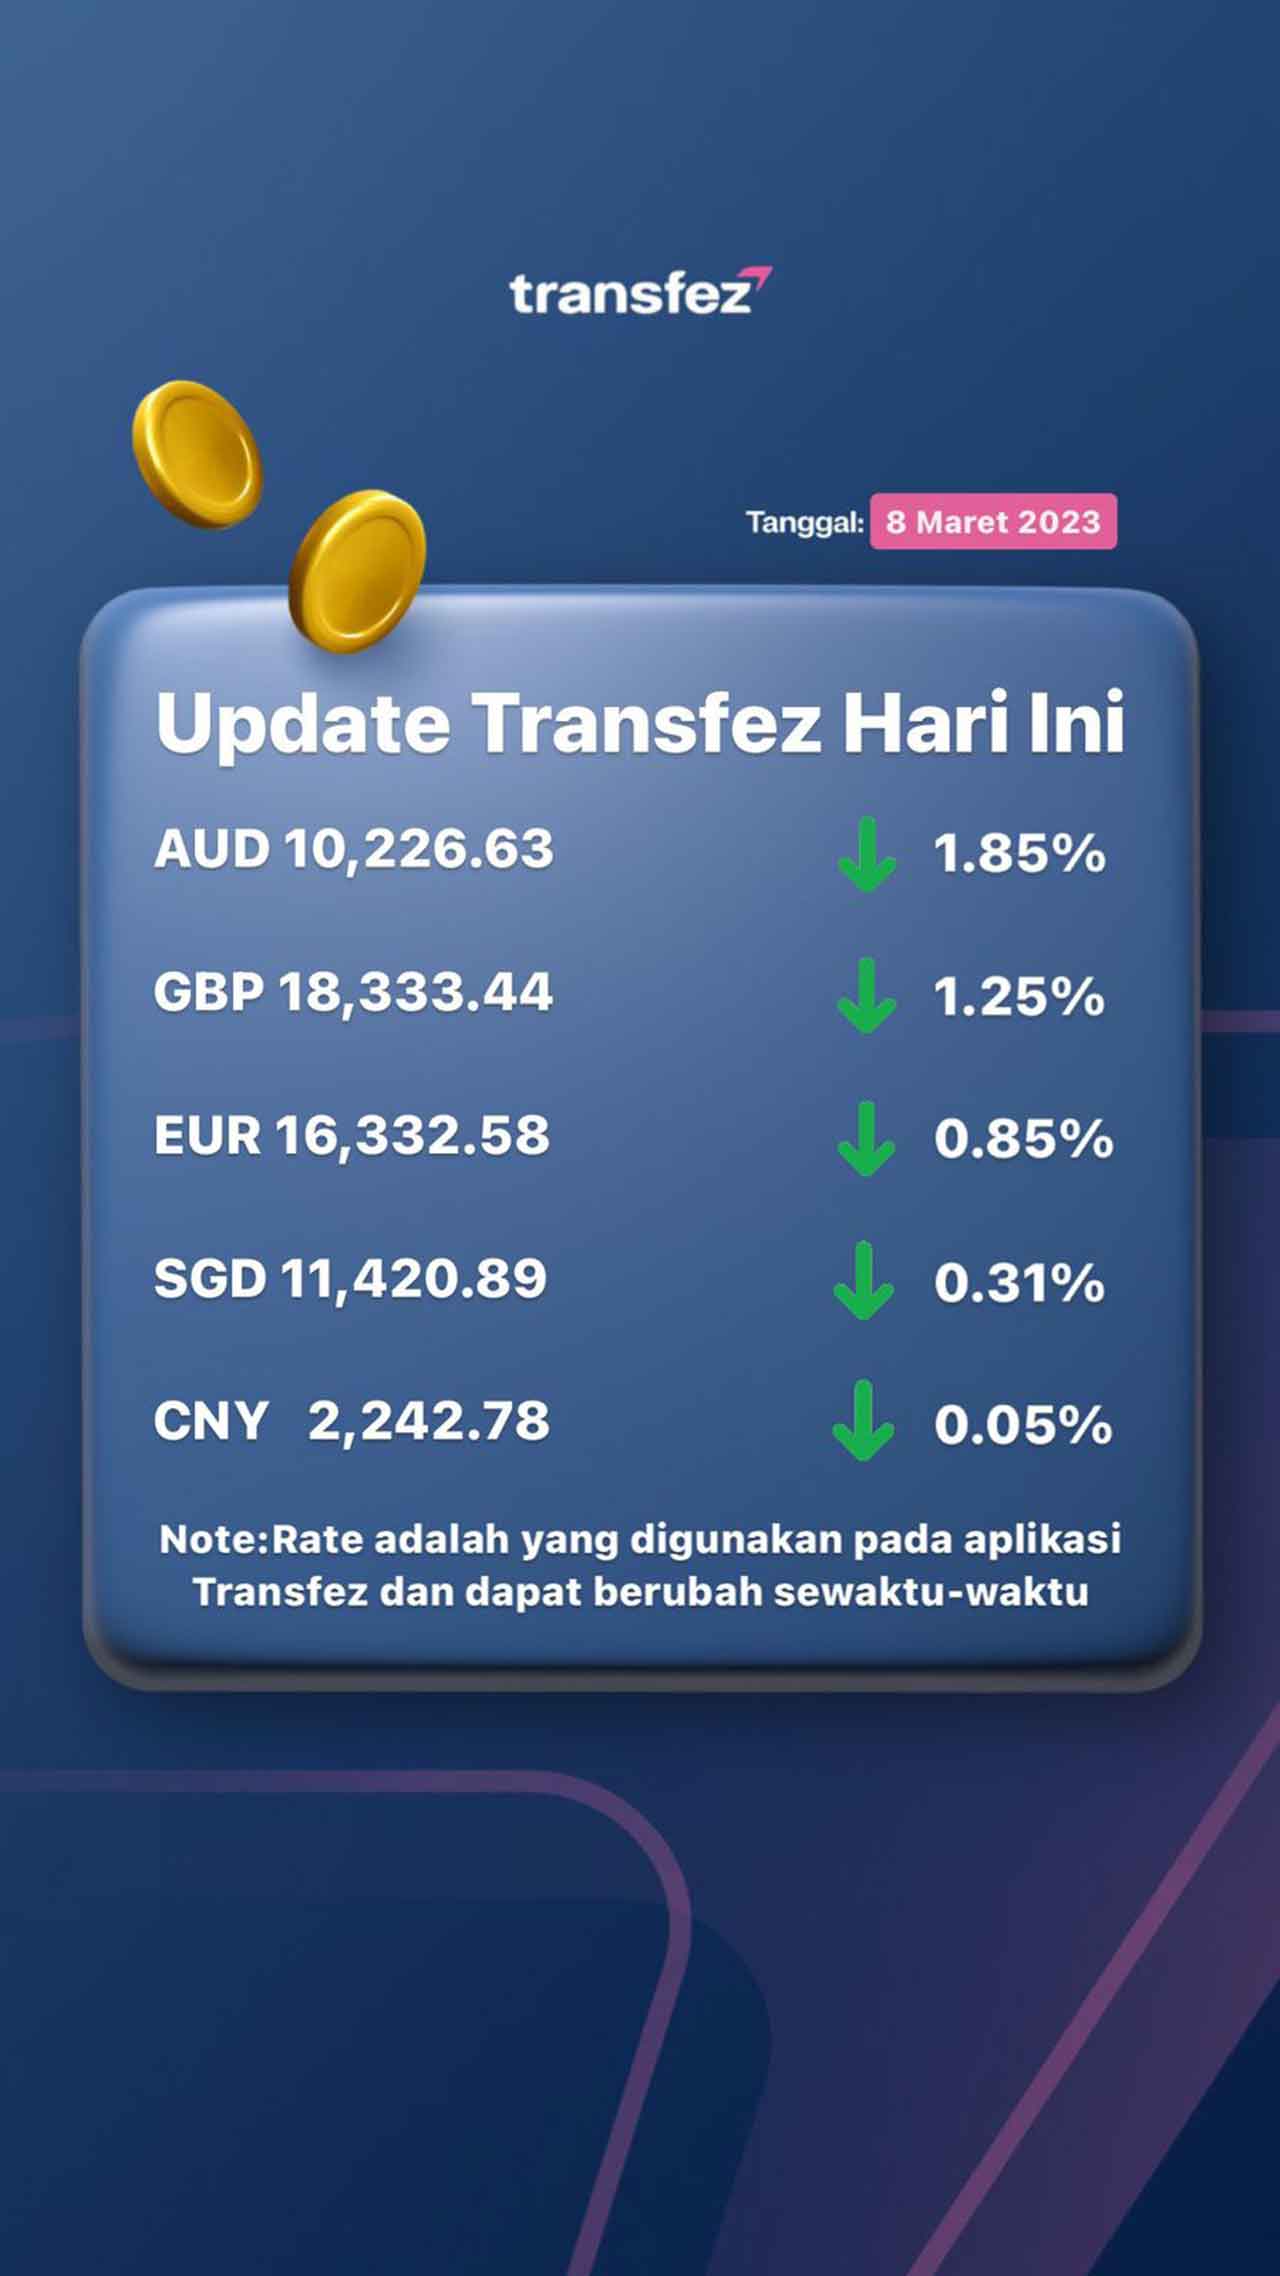 Today's Transfez Rate Update March 08 2023